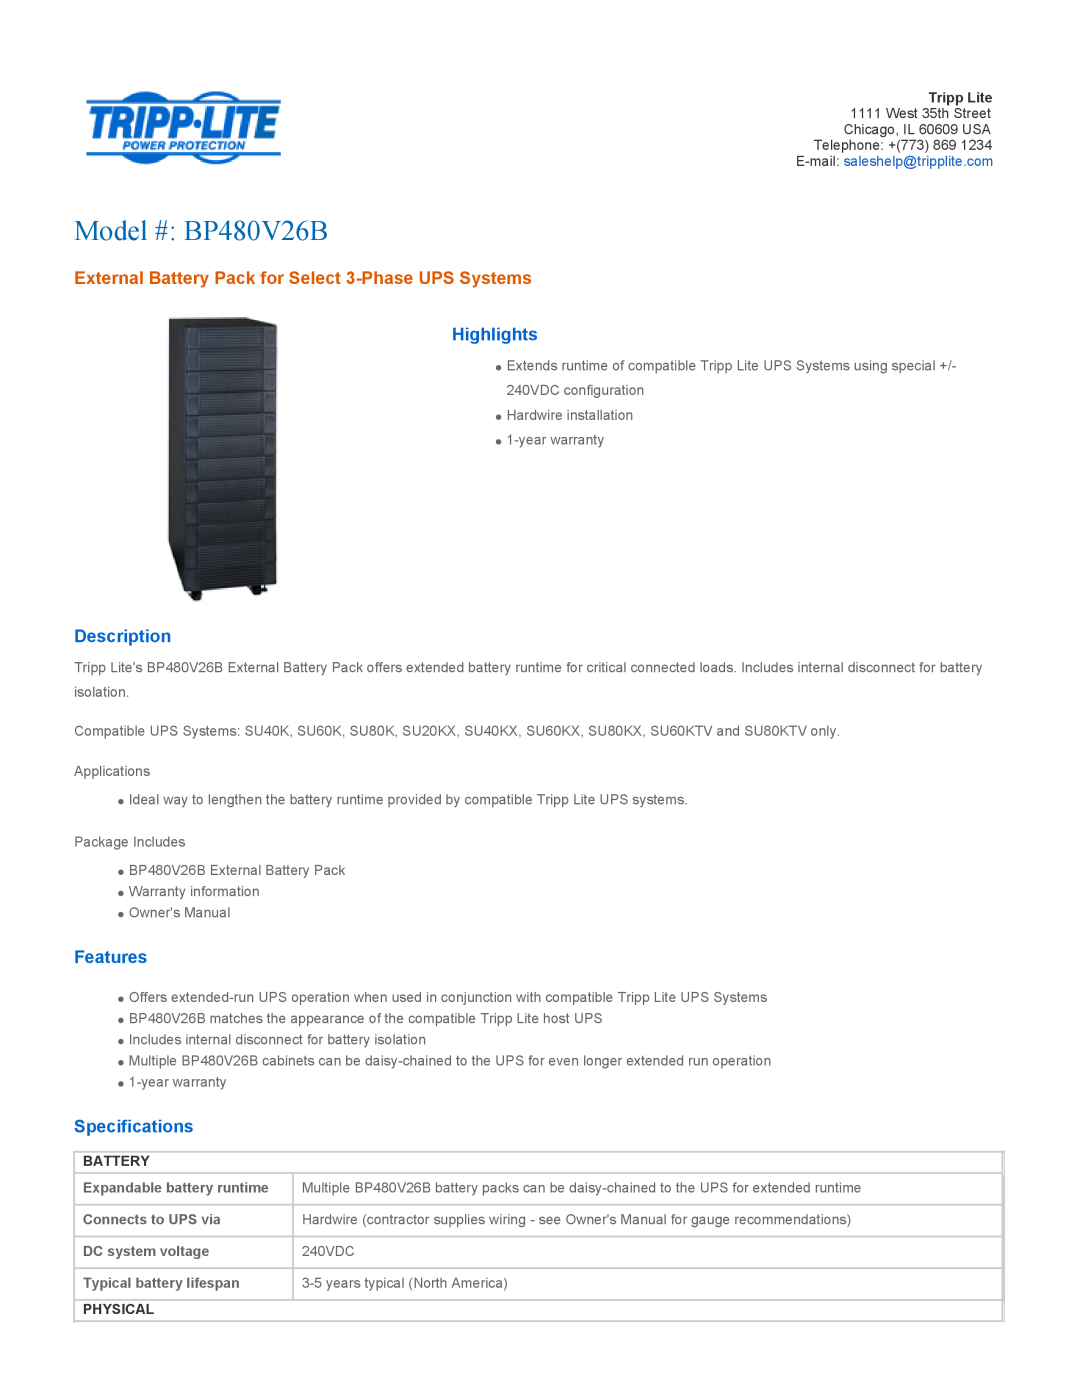 Tripp Lite BP480V26B specifications Battery, Expandable battery runtime, Connects to UPS via, DC system voltage, Physical 